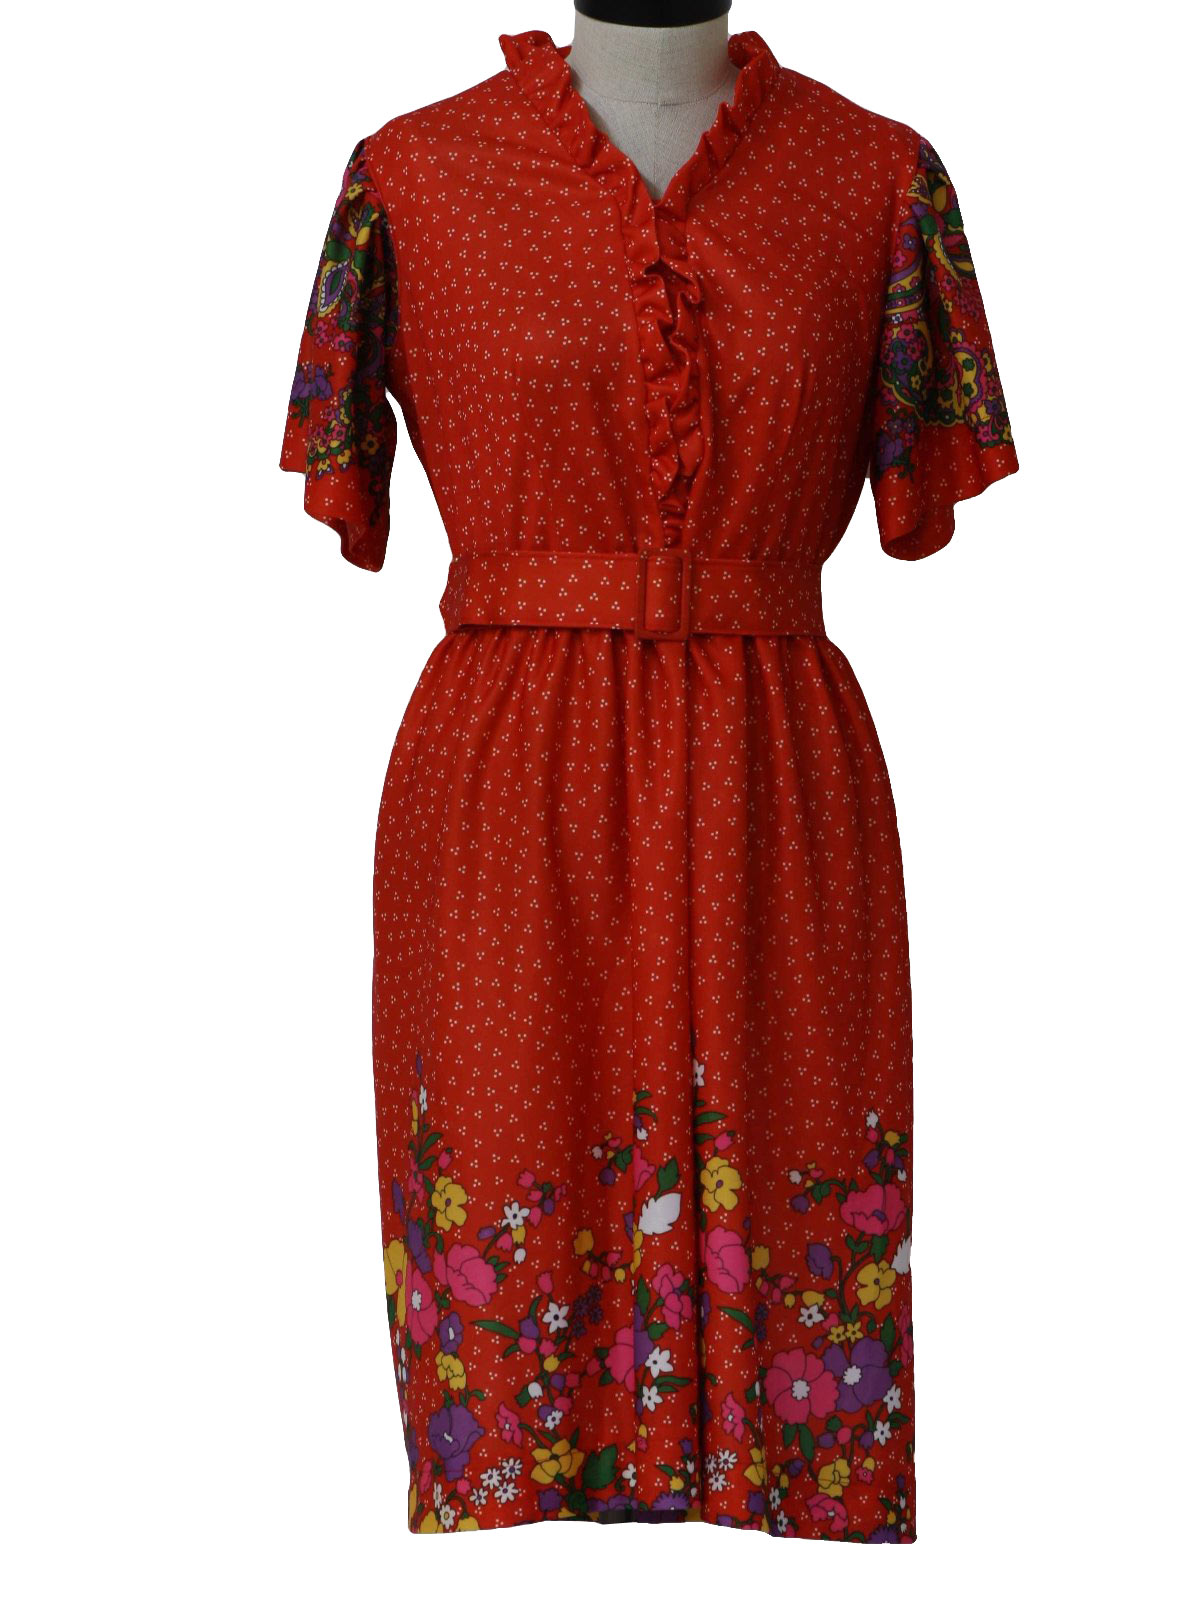 Retro 1970s Hippie Dress: 70s -Sherie Kay- Womens red, white, hot pink ...